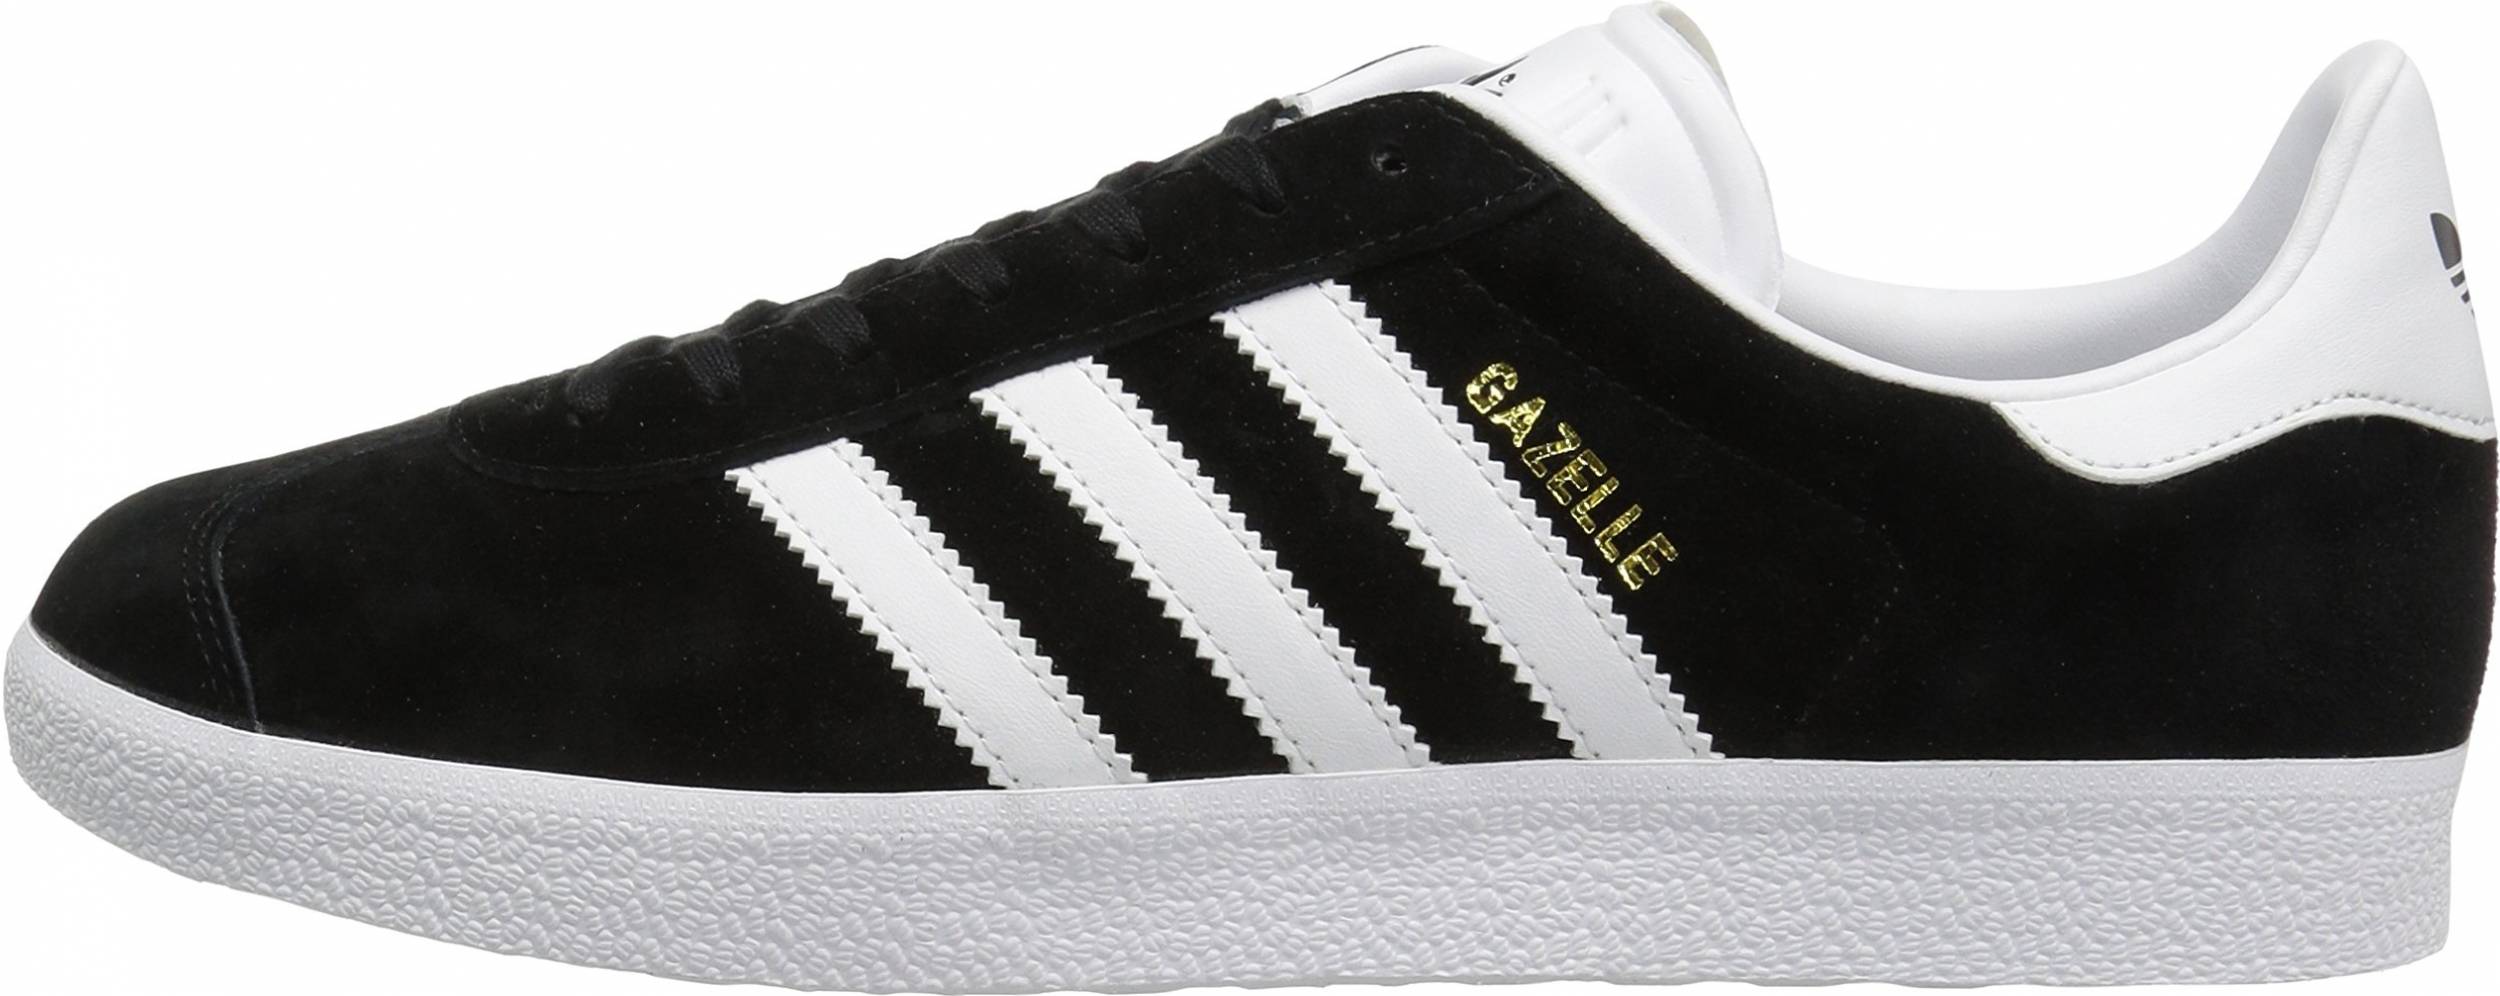 Adidas Gazelle sneakers in 50+ colors (only $39) | RunRepeat مينوسيد